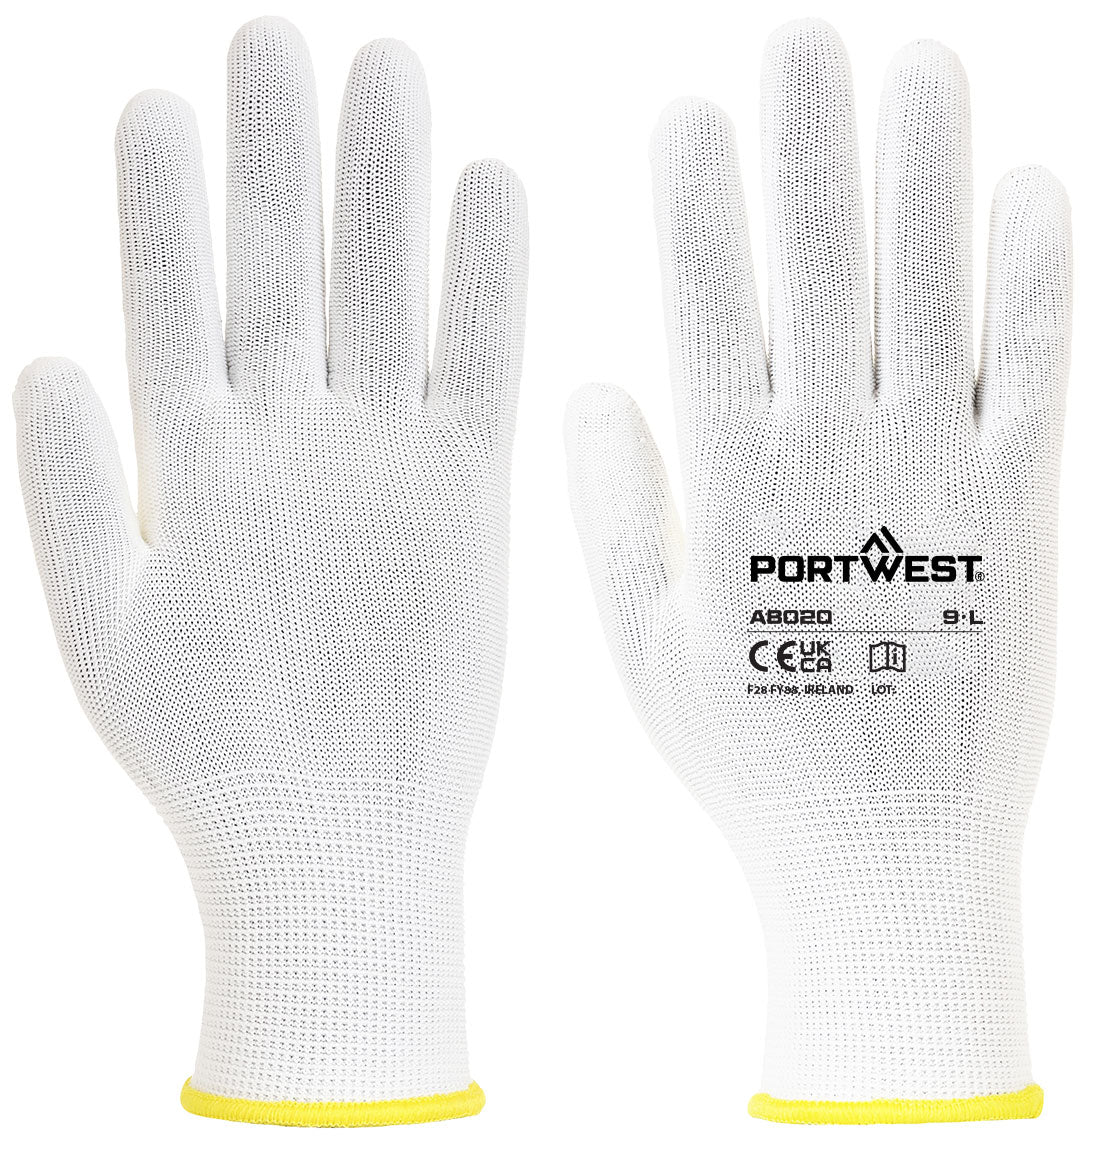 Portwest AB020 Assembly Glove (360 Pairs) for General Handling